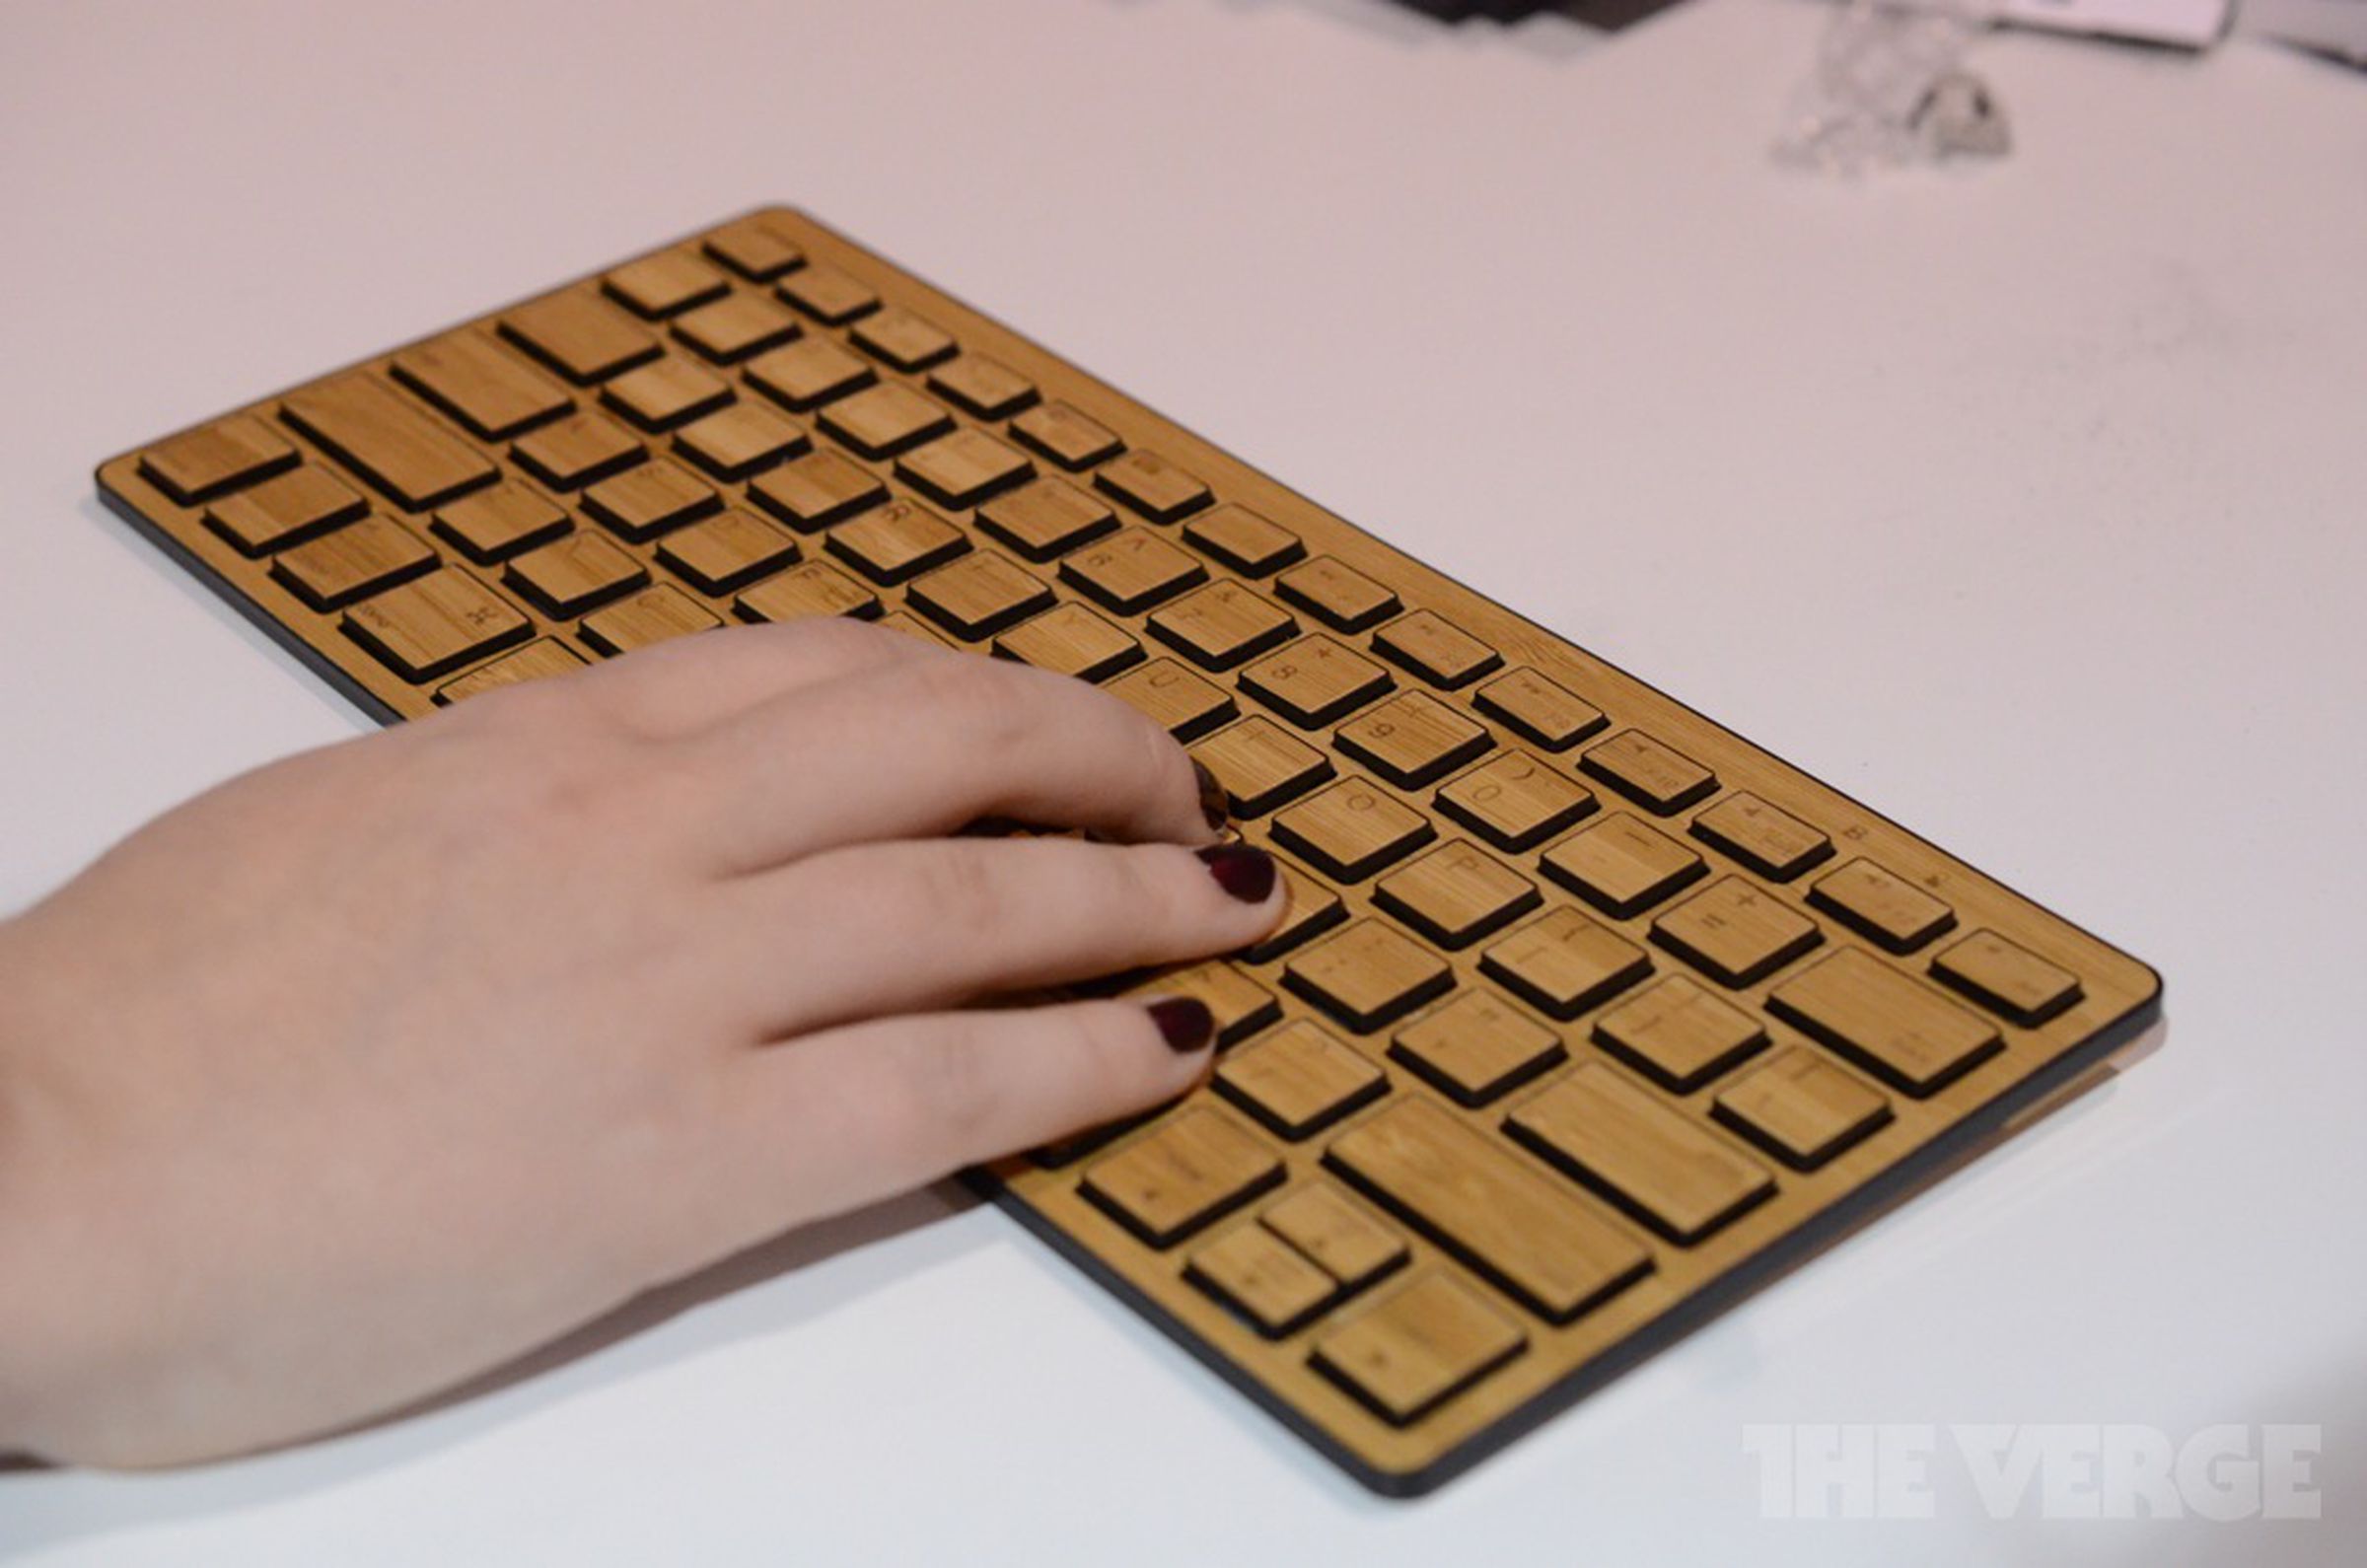 Impecca's Bamboo keyboards and mice hands-on photos